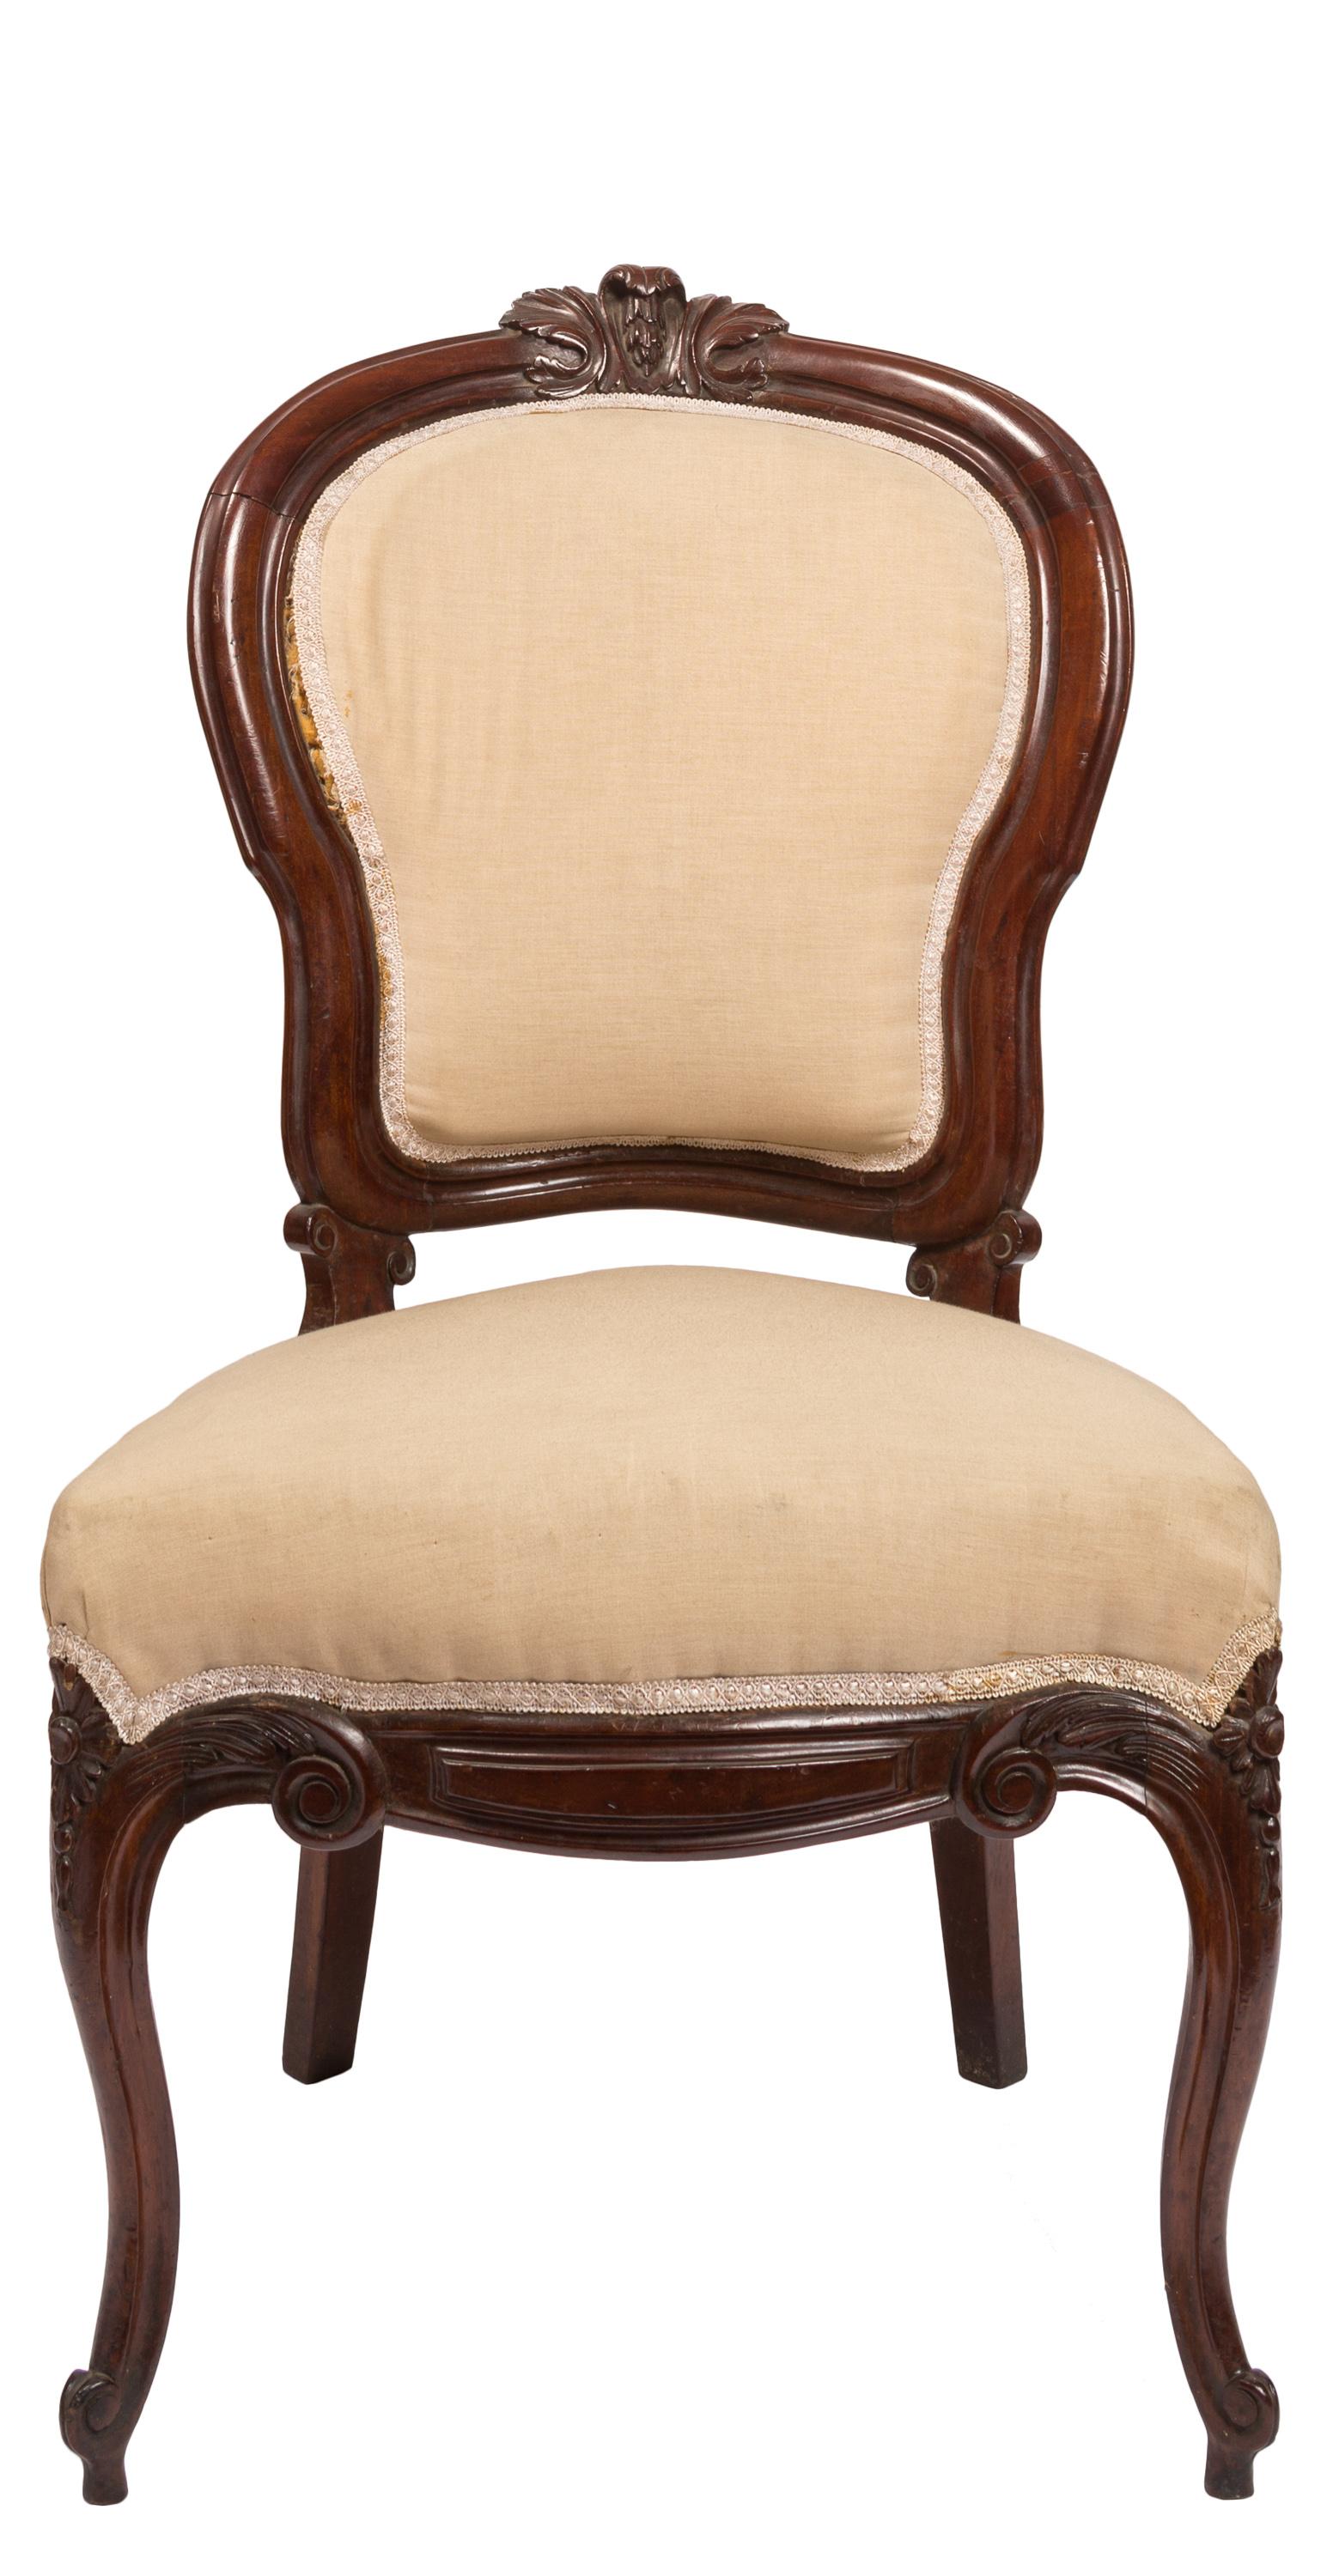 Set of Six Upholstered, Carved Spanish Isabelina / Victorian Period Side Chairs For Sale 8